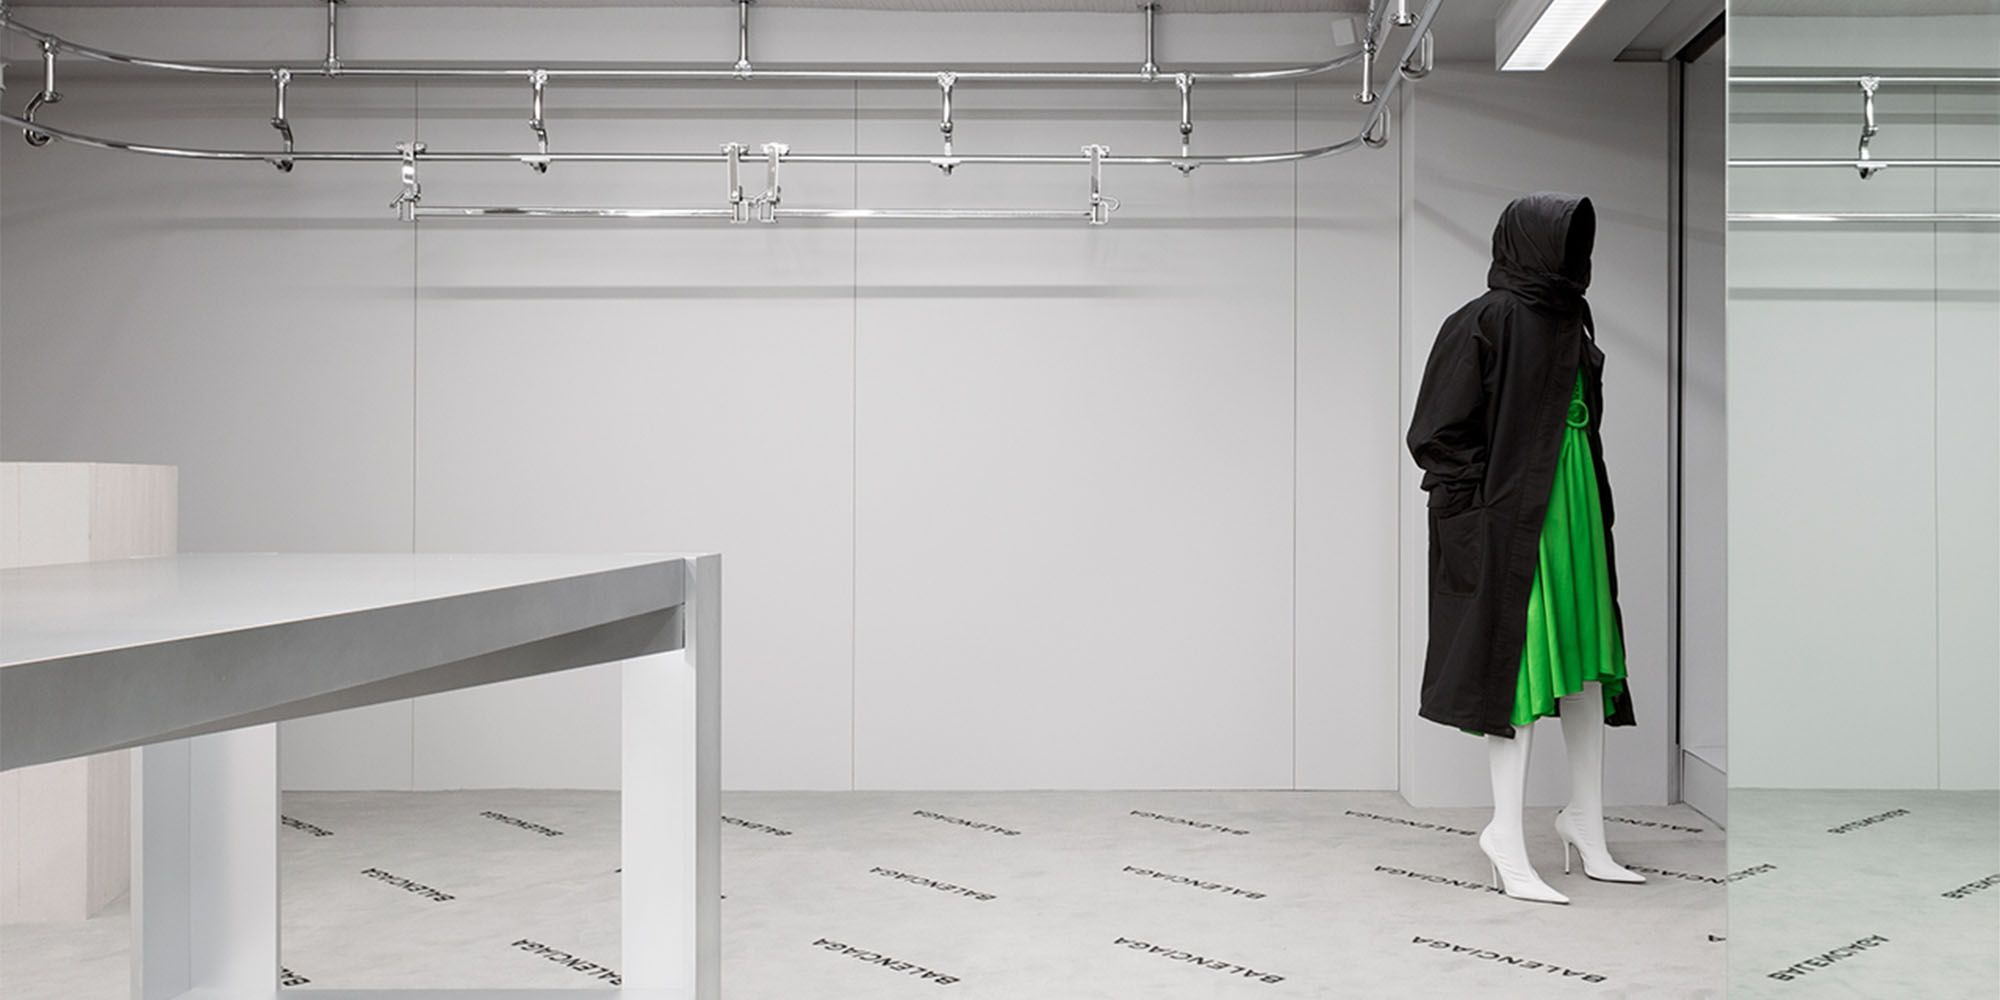 The First Demna-Designed US Store is as the as Expected - New Balenciaga In New York